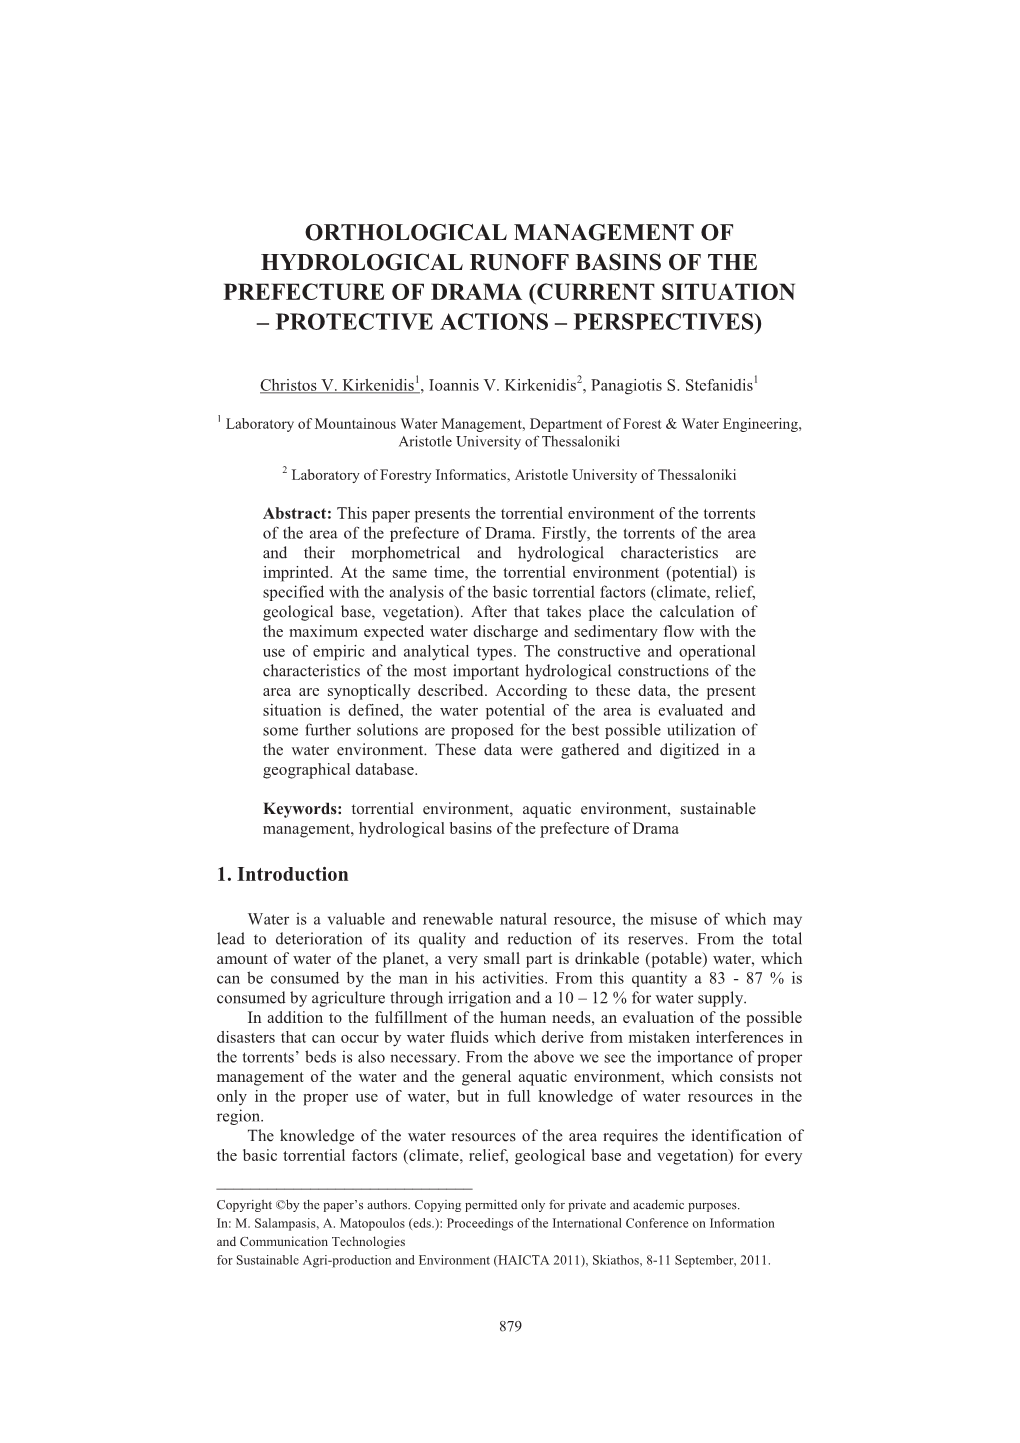 Orhtological Management of Hydrological Runoff Basins of The